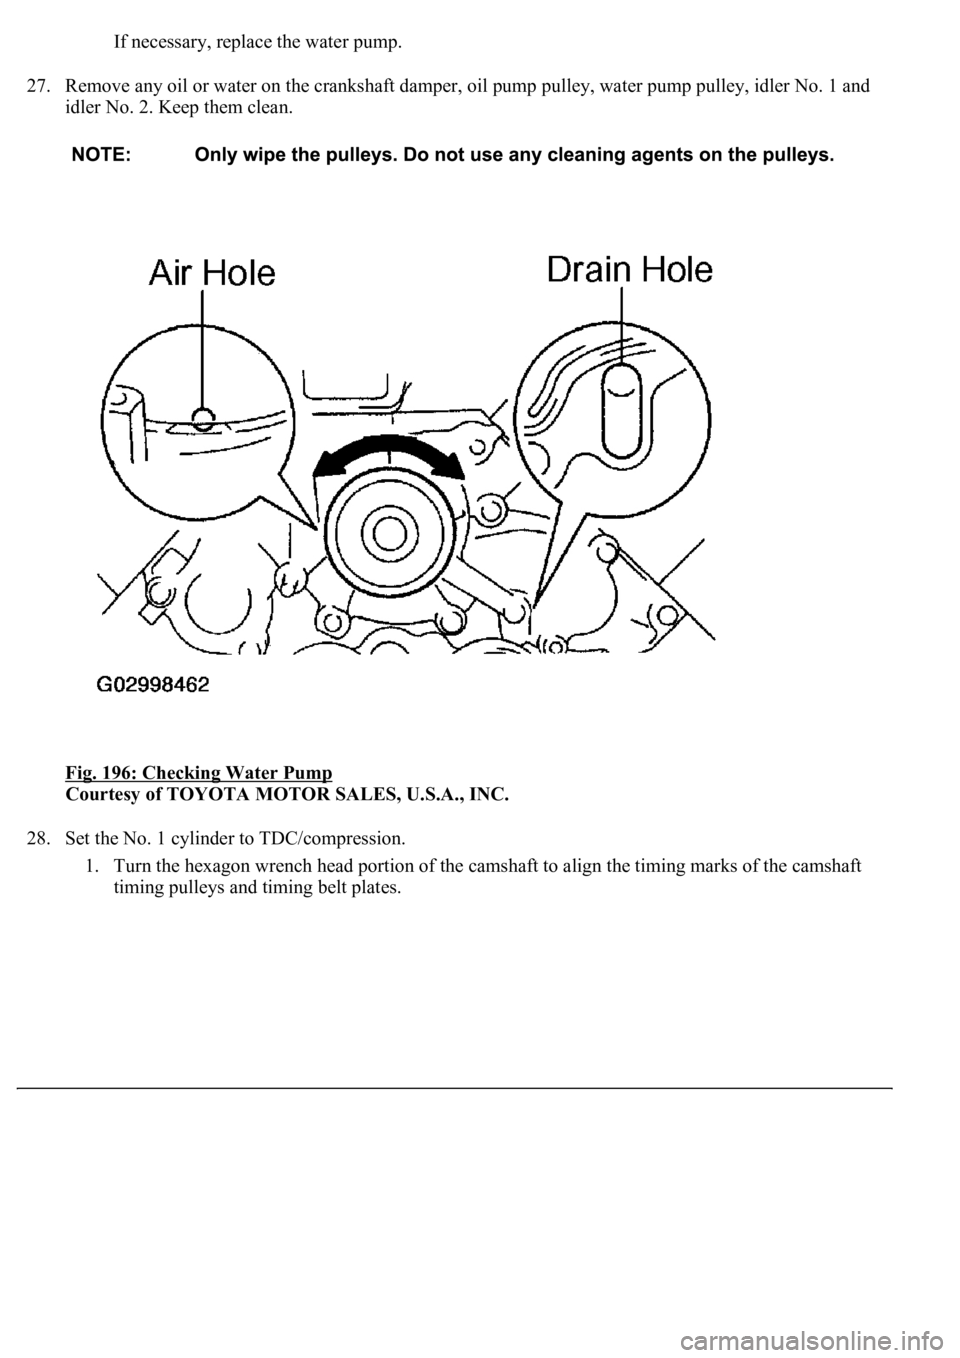 LEXUS LS430 2003  Factory Repair Manual If necessary, replace the water pump.
27. Remove any oil or water on the crankshaft damper, oil pump pulley, water pump pulley, idler No. 1 and 
idler No. 2. Keep them clean. 
Fig. 196: Checking Water